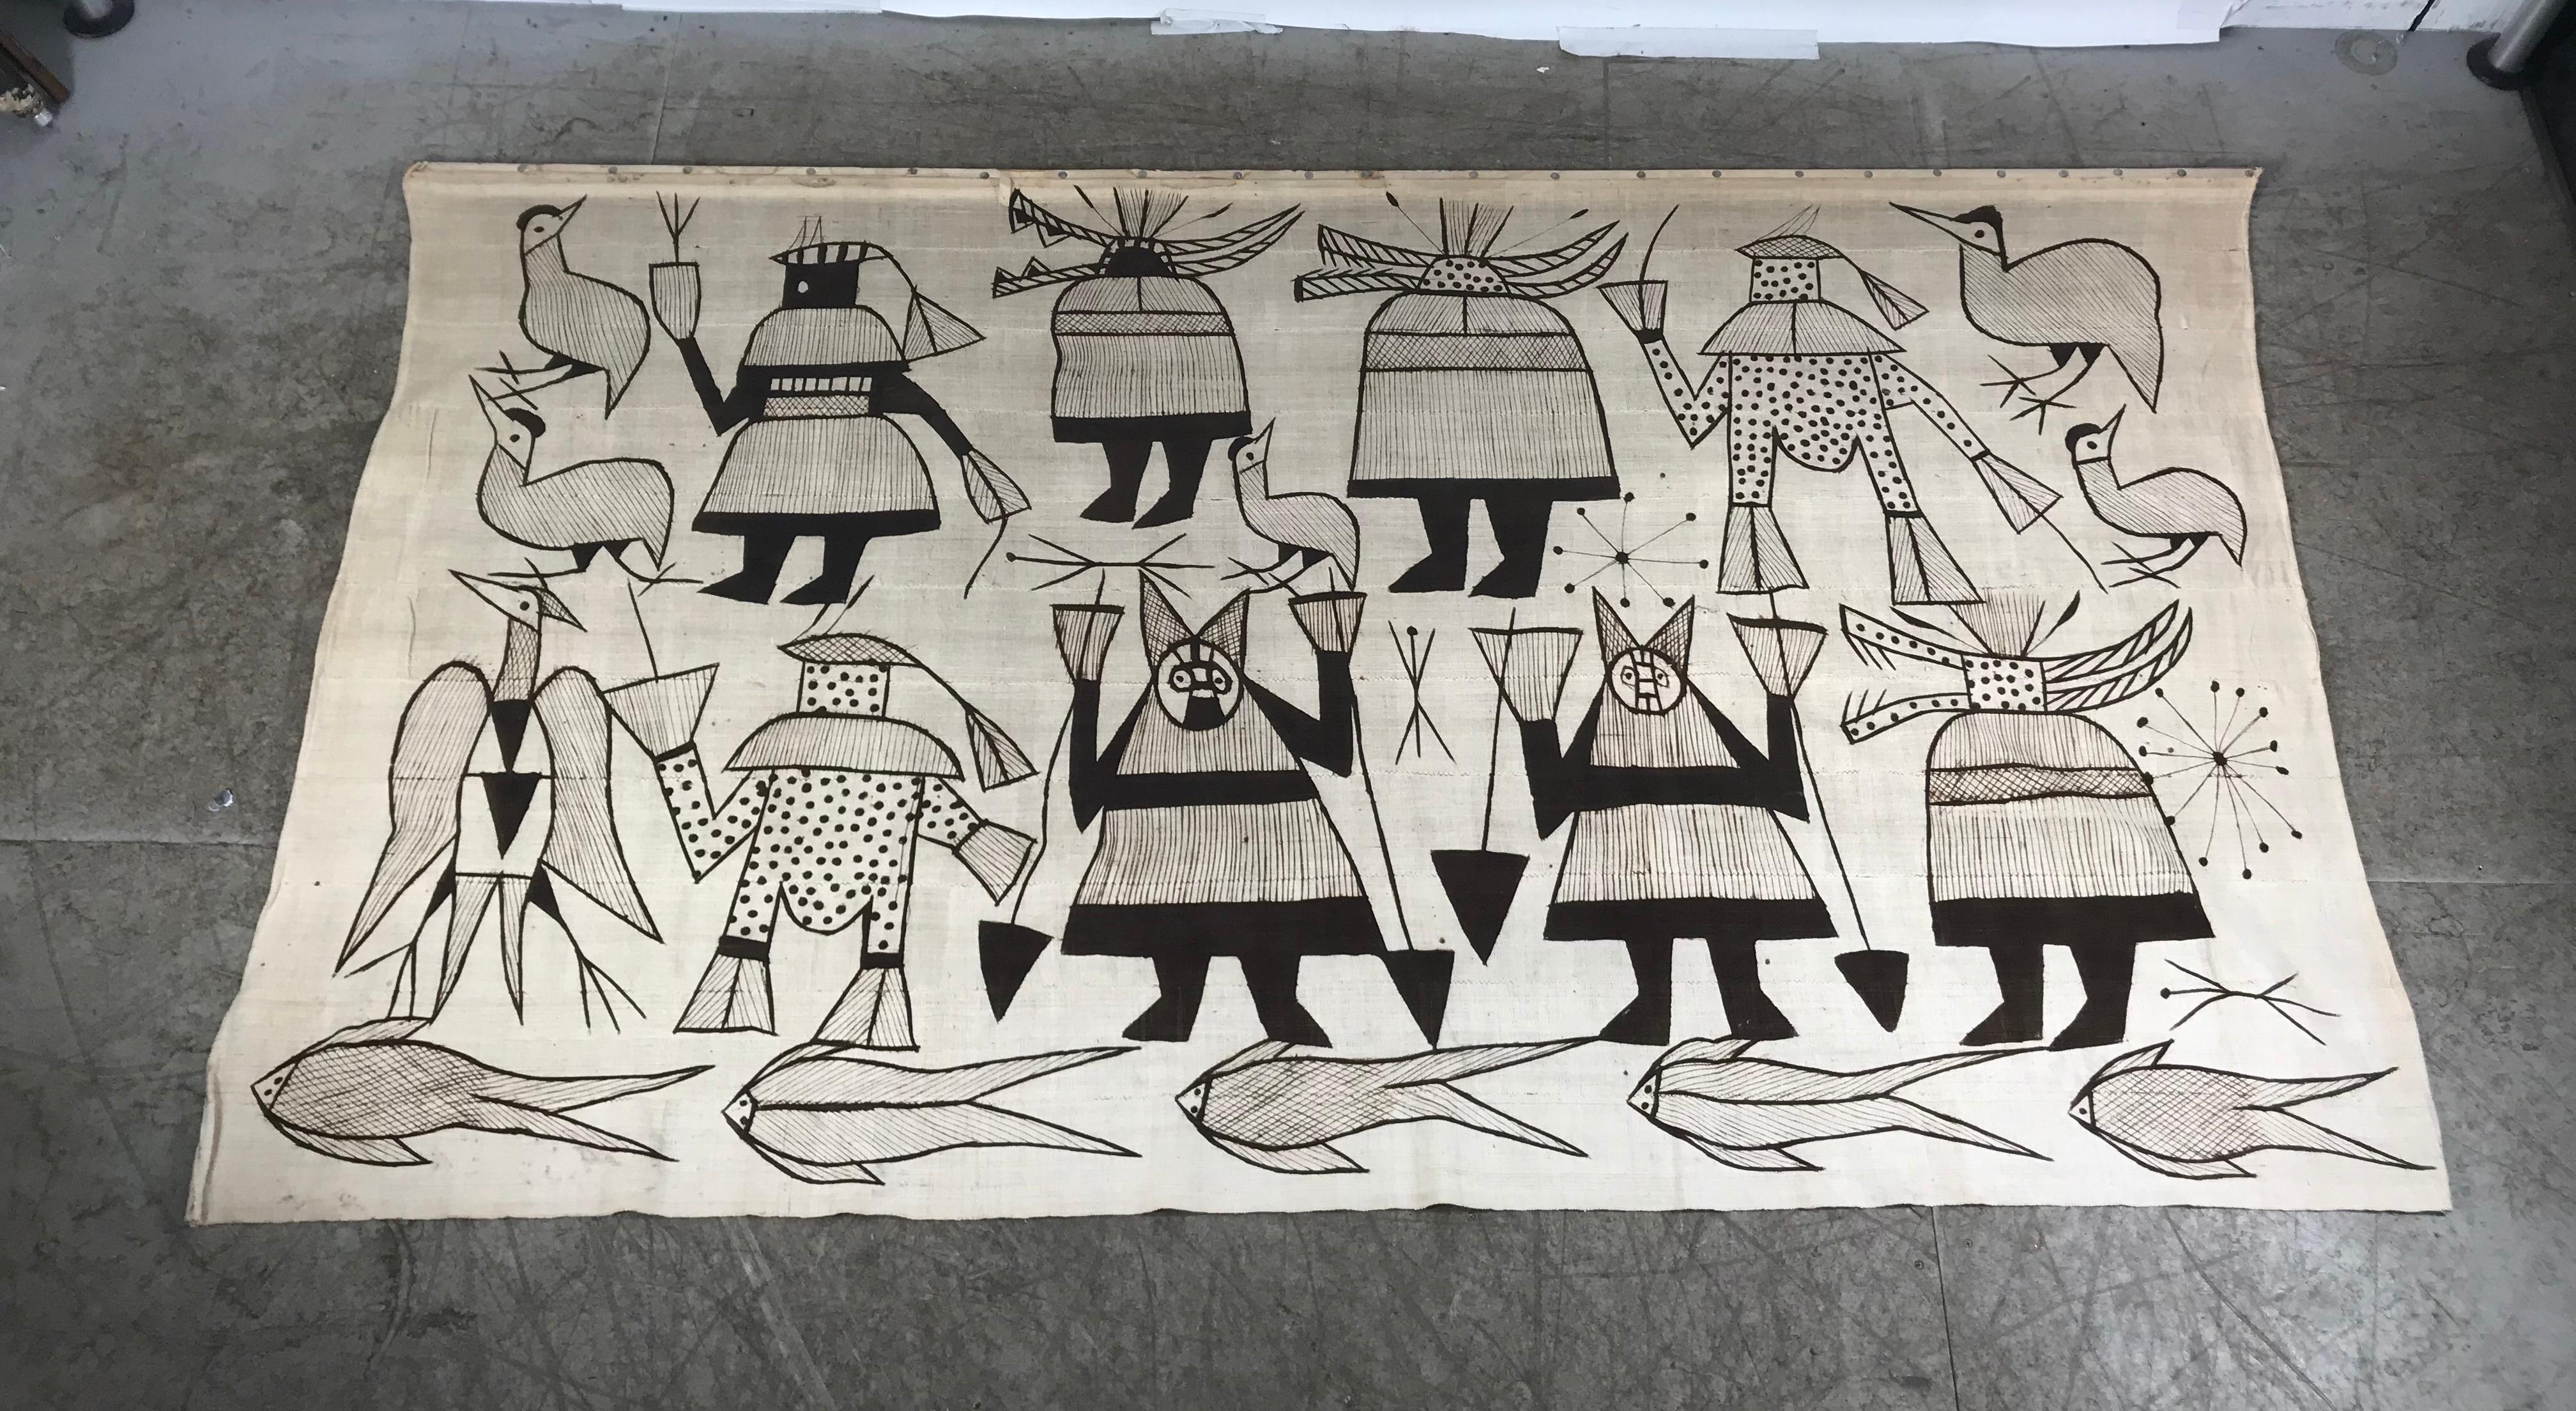 A bold mid-20th century Ivorian Senufo mounted handwoven cotton Korhogo cloth depicting several figures in costume, dancing, amidst a field of birds, and fish. Korhogo cloths are woven of cotton in narrow strips, stitched together, and painted with